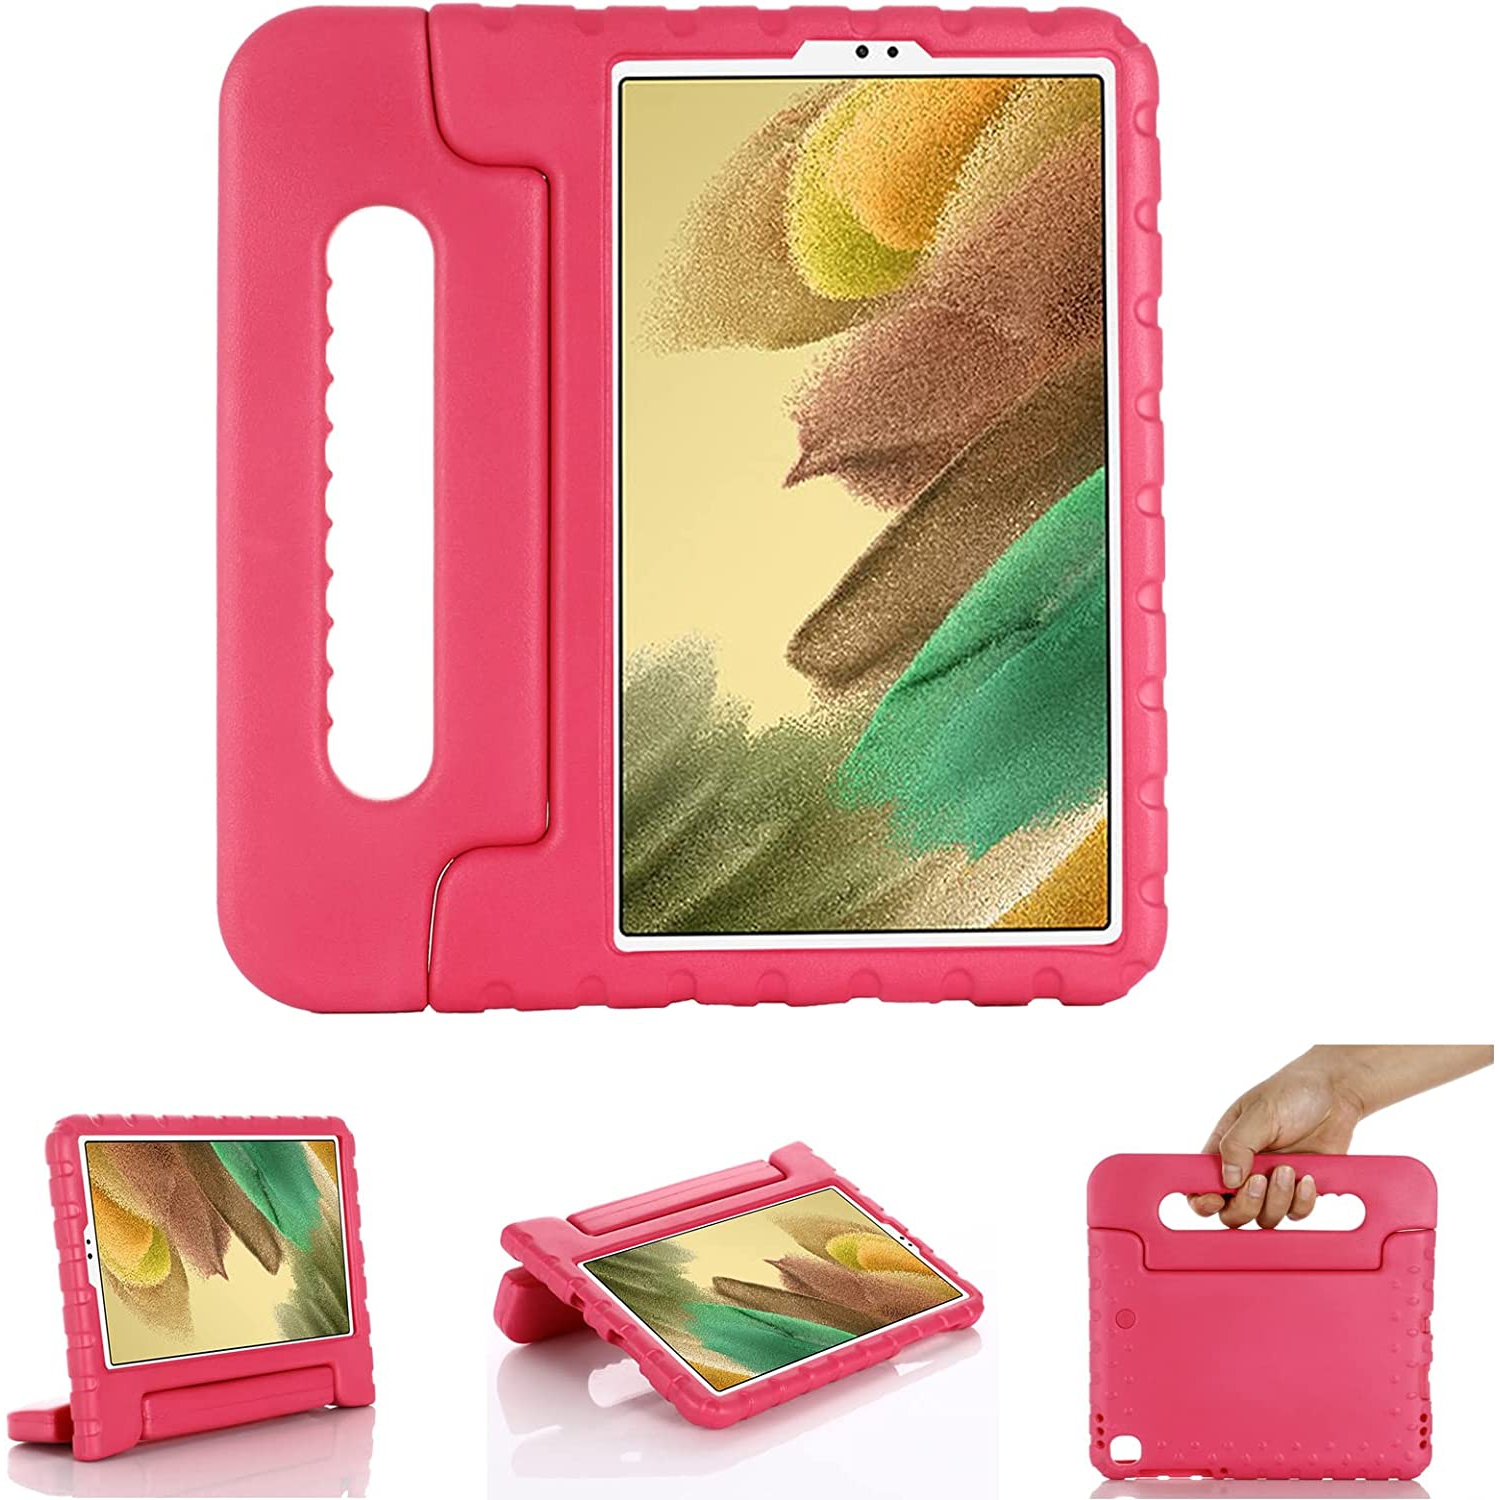 F Case for Samsung Galaxy Tab A7 Lite 8.7 Inch (SM-T225/T220/T227), Shockproof Convertible Handle Stand Lightweight Kids Friendly Case Cover for Samsung Tab A7 Lite 8.7 2021 Tablet